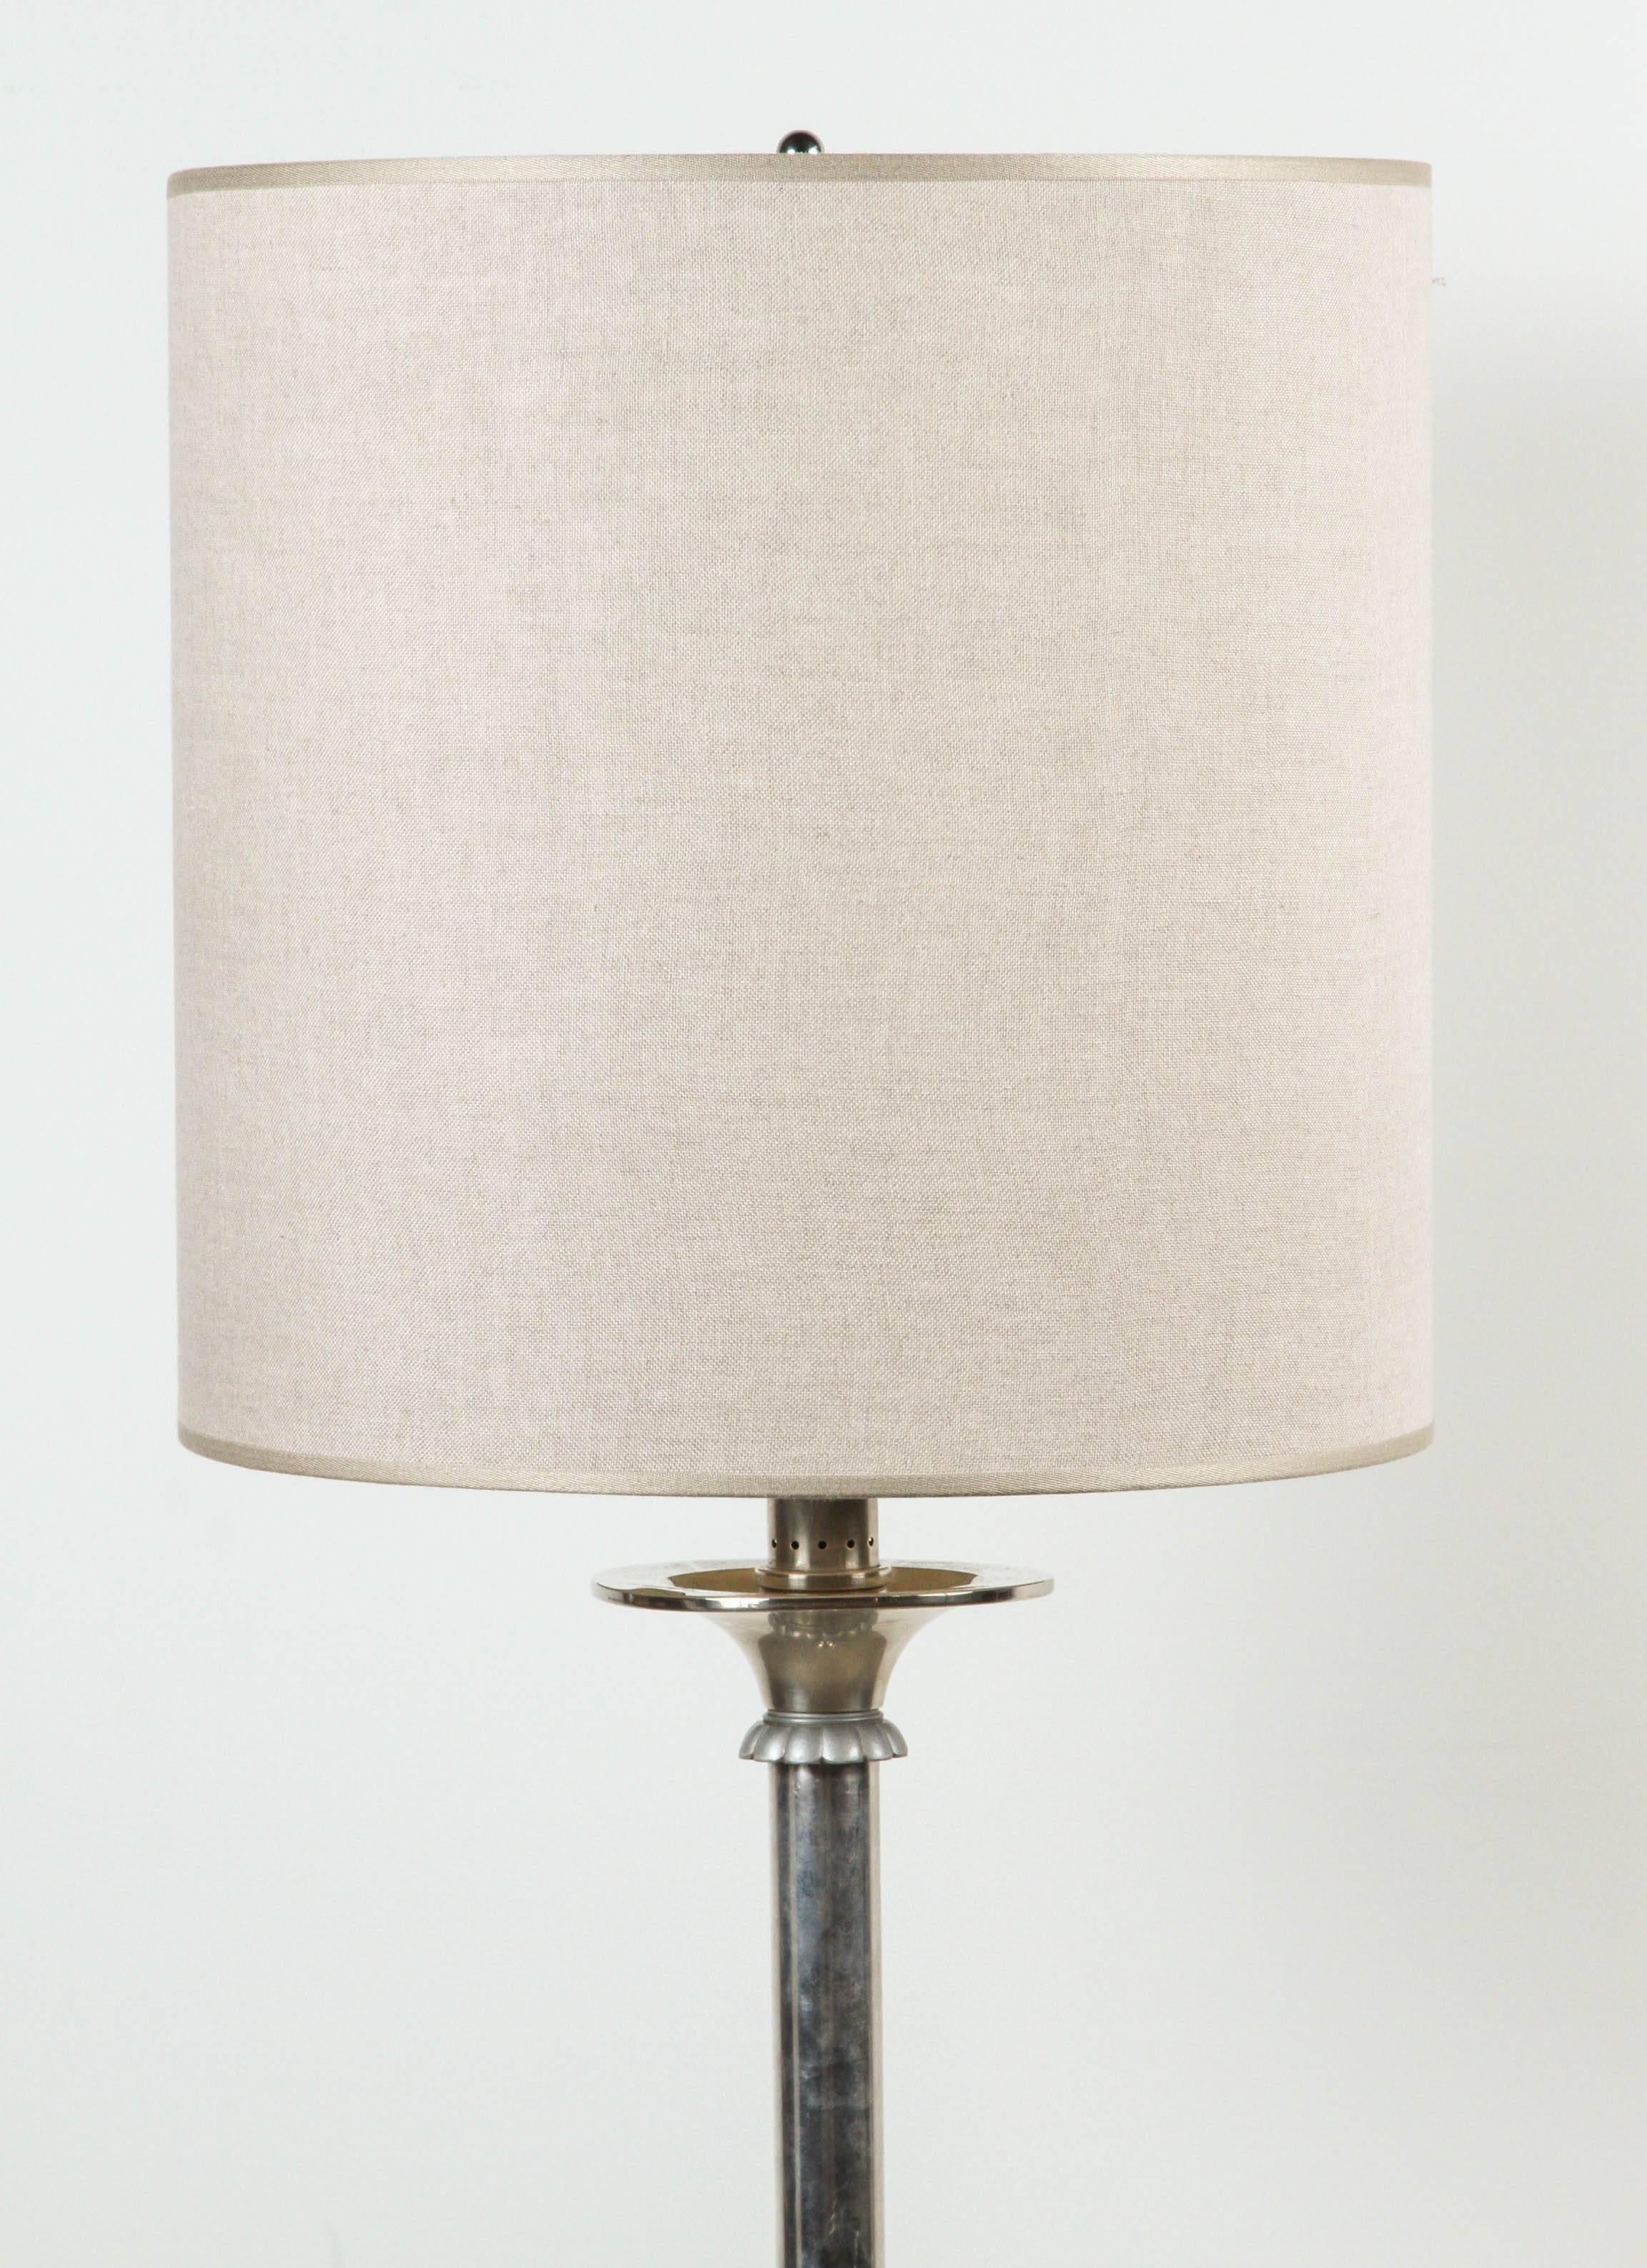 Italian silver floor lamp with flower detail and an oversized lampshade.